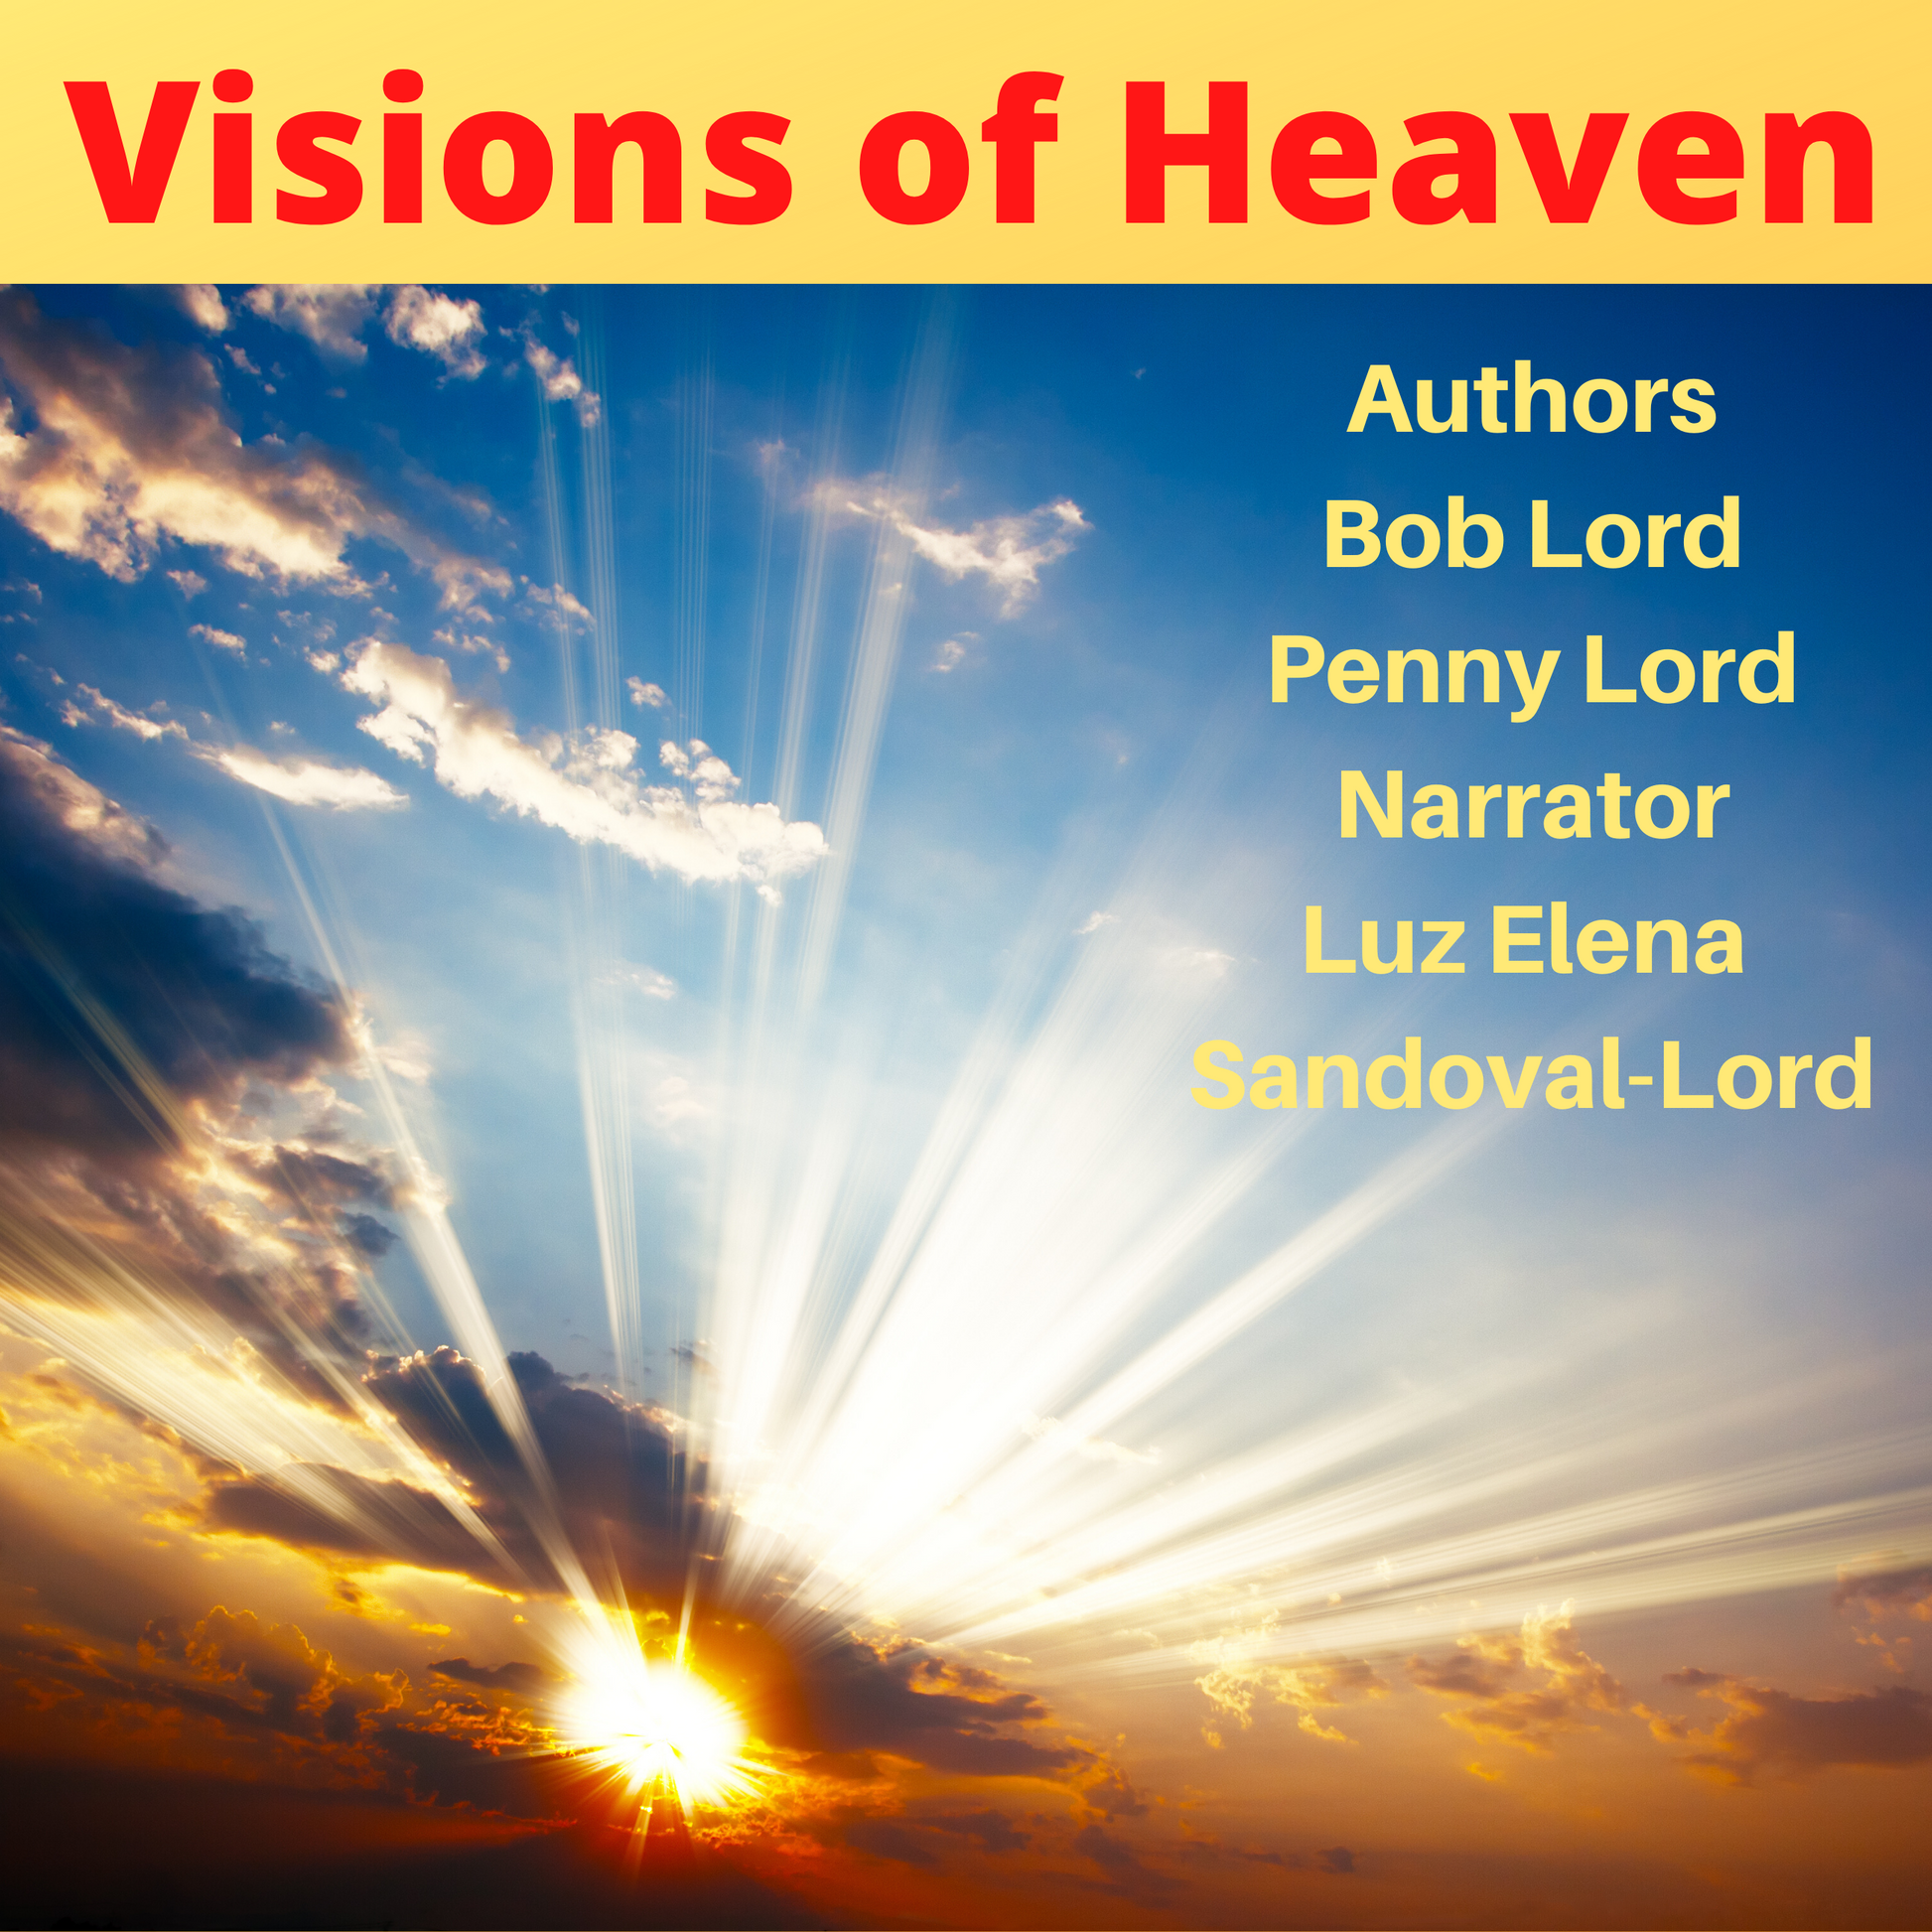 Visions of Heaven Audiobook - Bob and Penny Lord